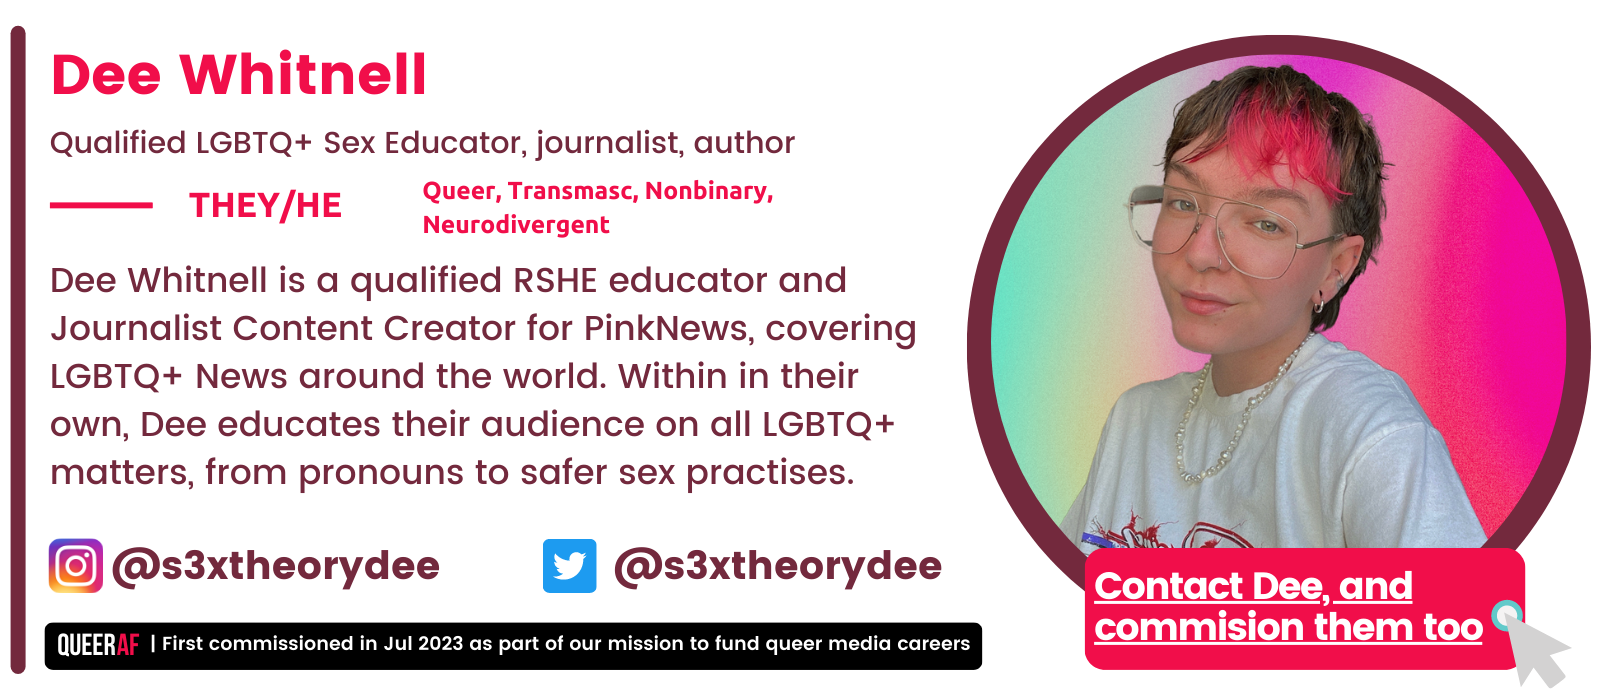 | First commissioned in Jul 2023 as part of our mission to fund queer media careers Queer AF @s3xtheorydee Contact Dee, and commision them too Dee Whitnell is a qualified RSHE educator and Journalist Content Creator for PinkNews, covering LGBTQ+ News around the world. Within in their own, Dee educates their audience on all LGBTQ+ matters, from pronouns to safer sex practises.  They/He Dee Whitnell Qualified LGBTQ+ Sex Educator, journalist, author